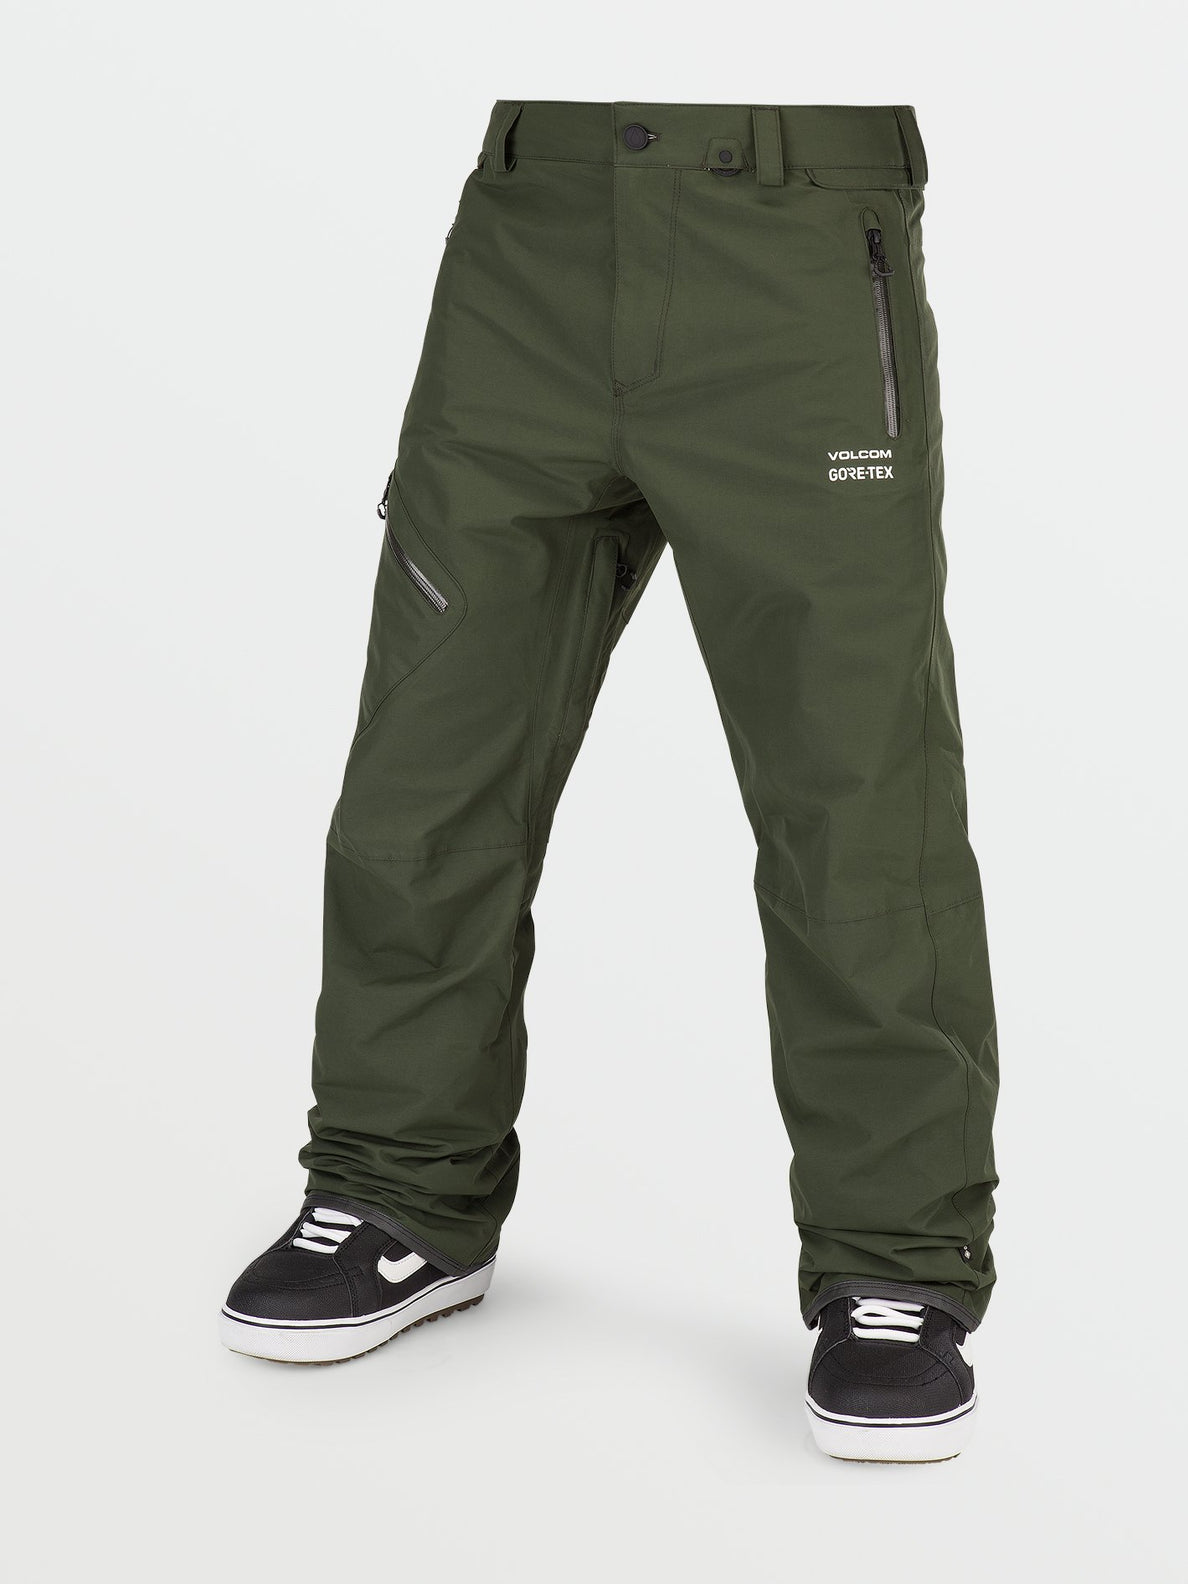 L Gore-Tex Trousers - SATURATED GREEN (G1351904_SAG) [F]